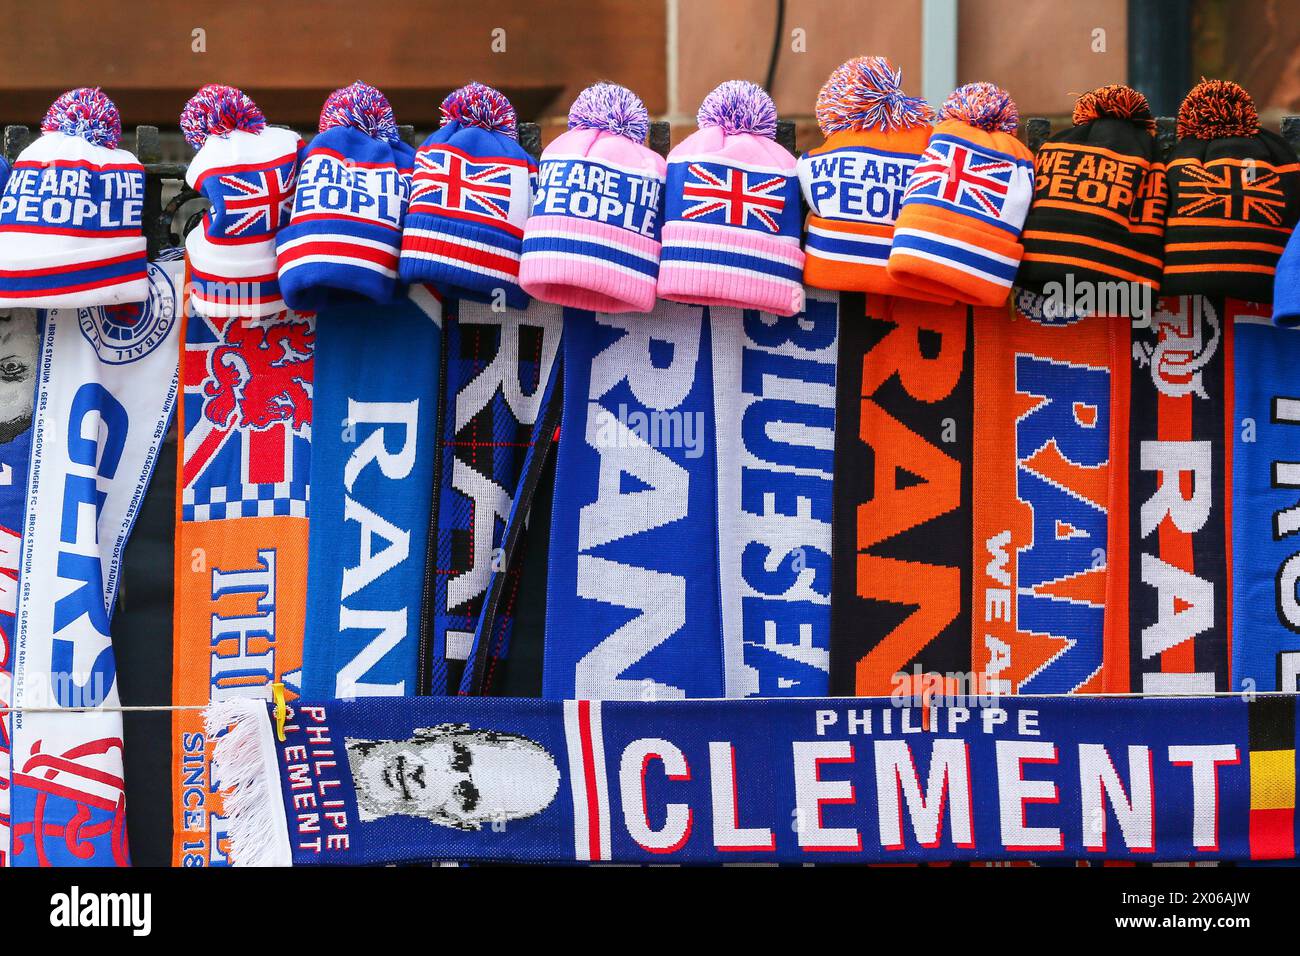 Bobble hats and scarves with logos and phrases supporting Rangers football club for sale outside Ibrox stadium, Glasgow, Scotland, UK Stock Photo